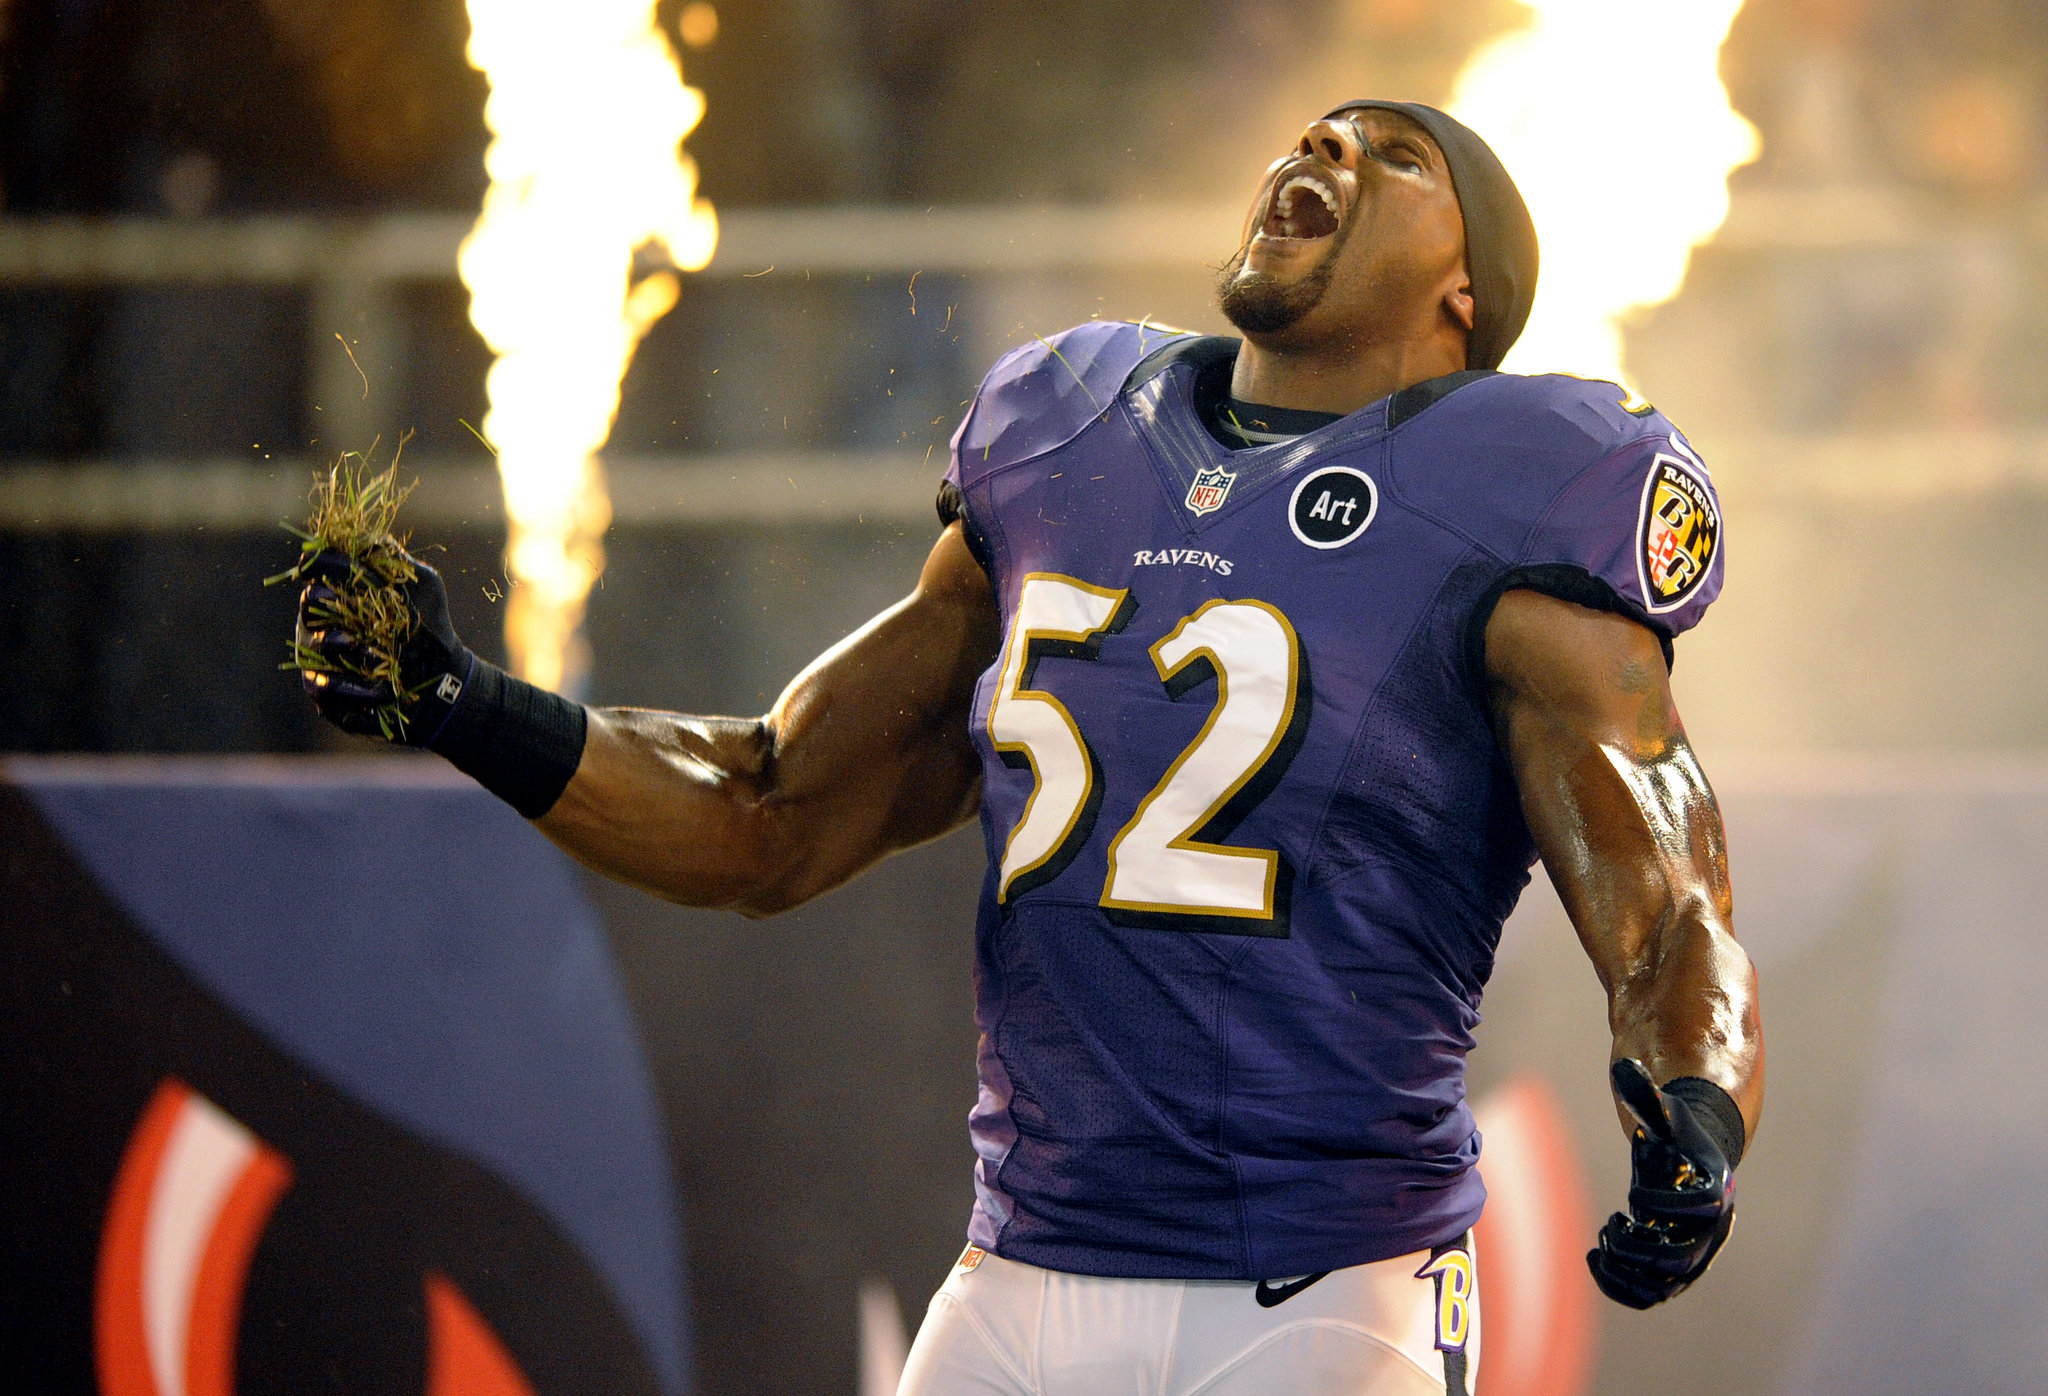 An hour spent with Ray Lewis and Coaching Bad will make you feel.